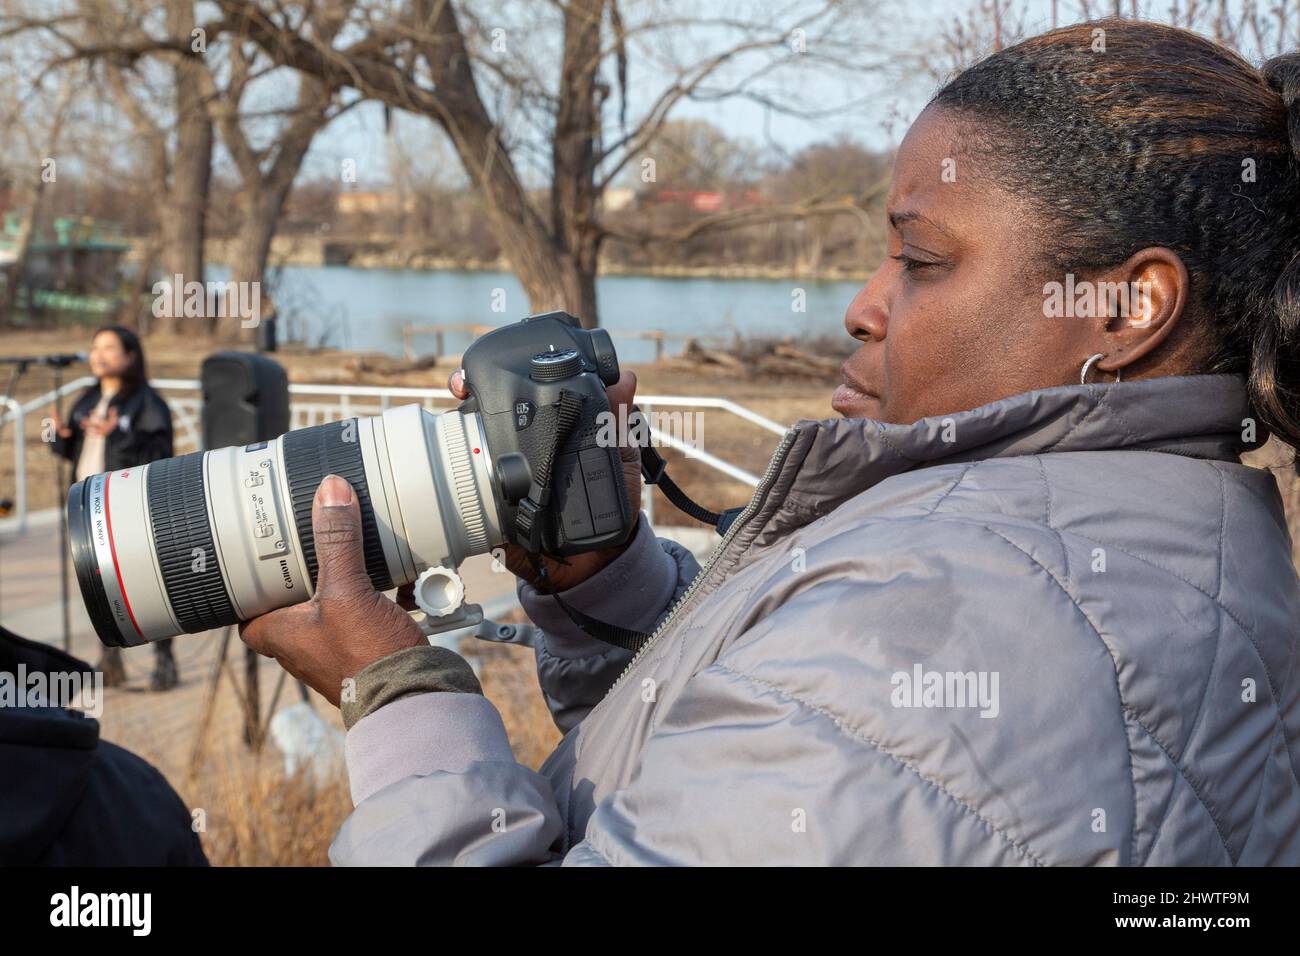 Detroit, Michigan - A photographer at work, with a Canon camera and telephoto zoom lens. Stock Photo